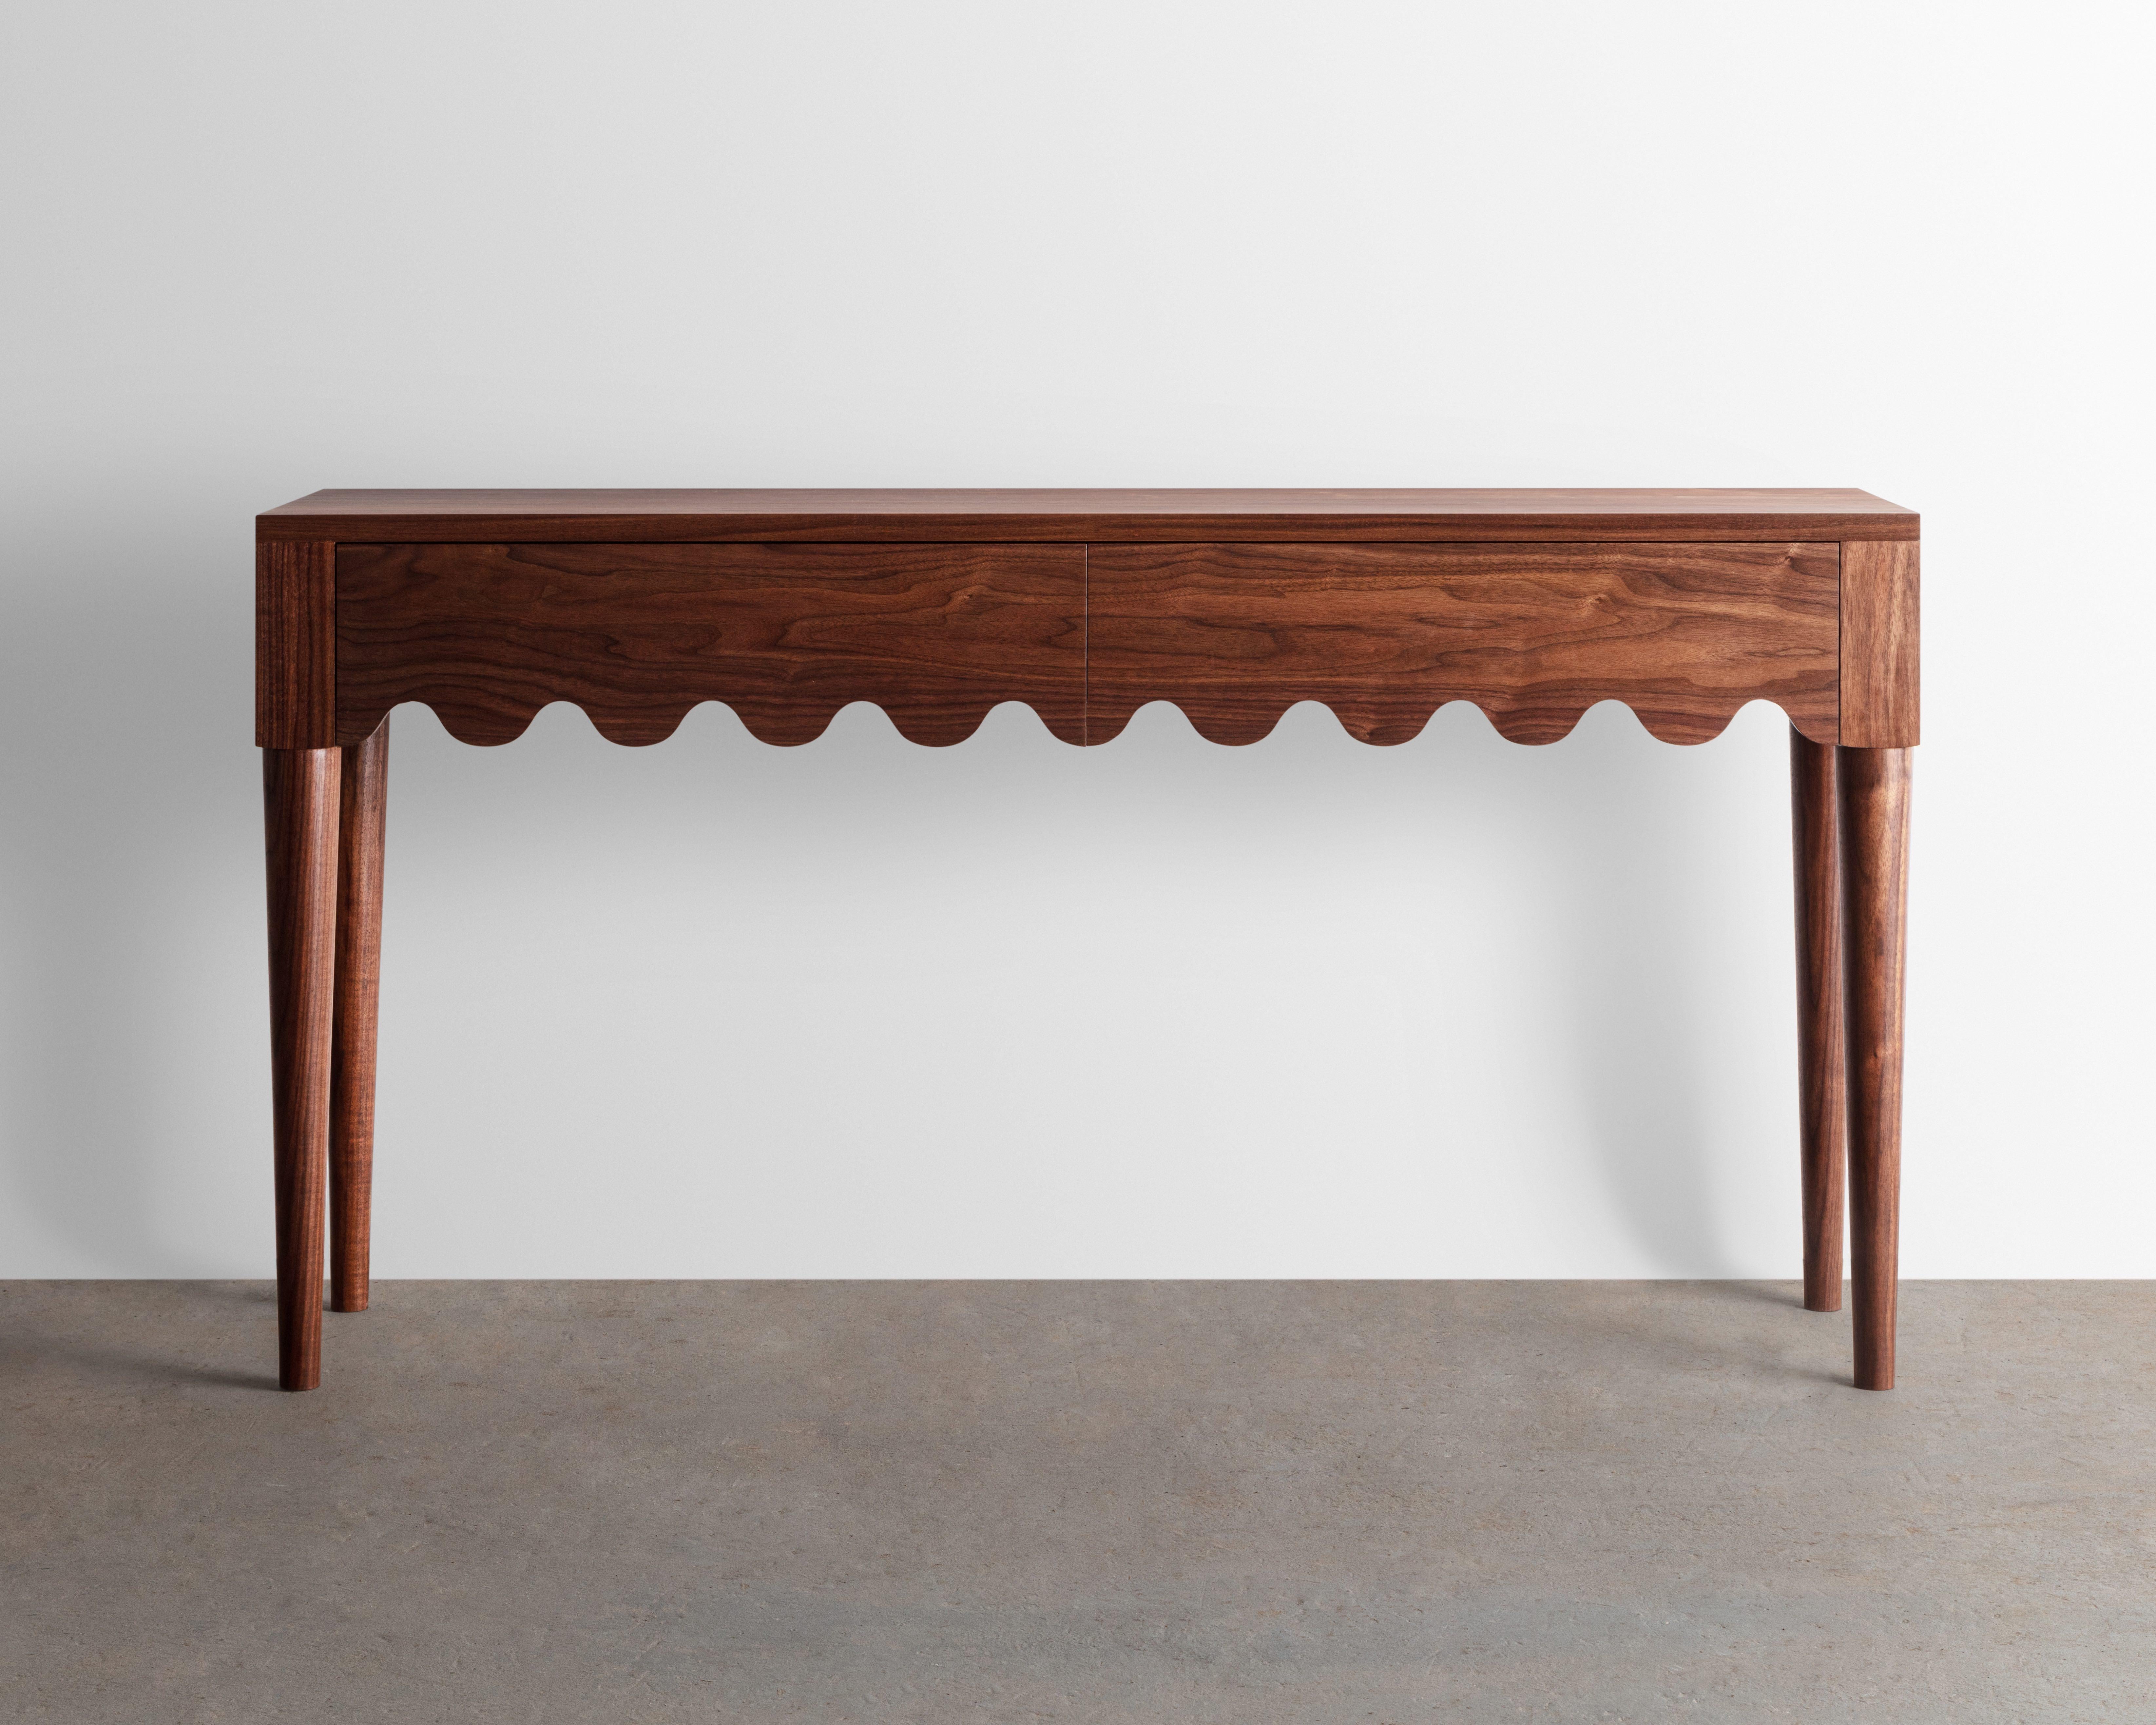 Designed and built in the studio this entryway table features a playful detail that continues along its double drawer faces and seamlessly wraps around its form. 

Made from solid Walnut -inspired by the French mid-century designer Jean Royère.
 